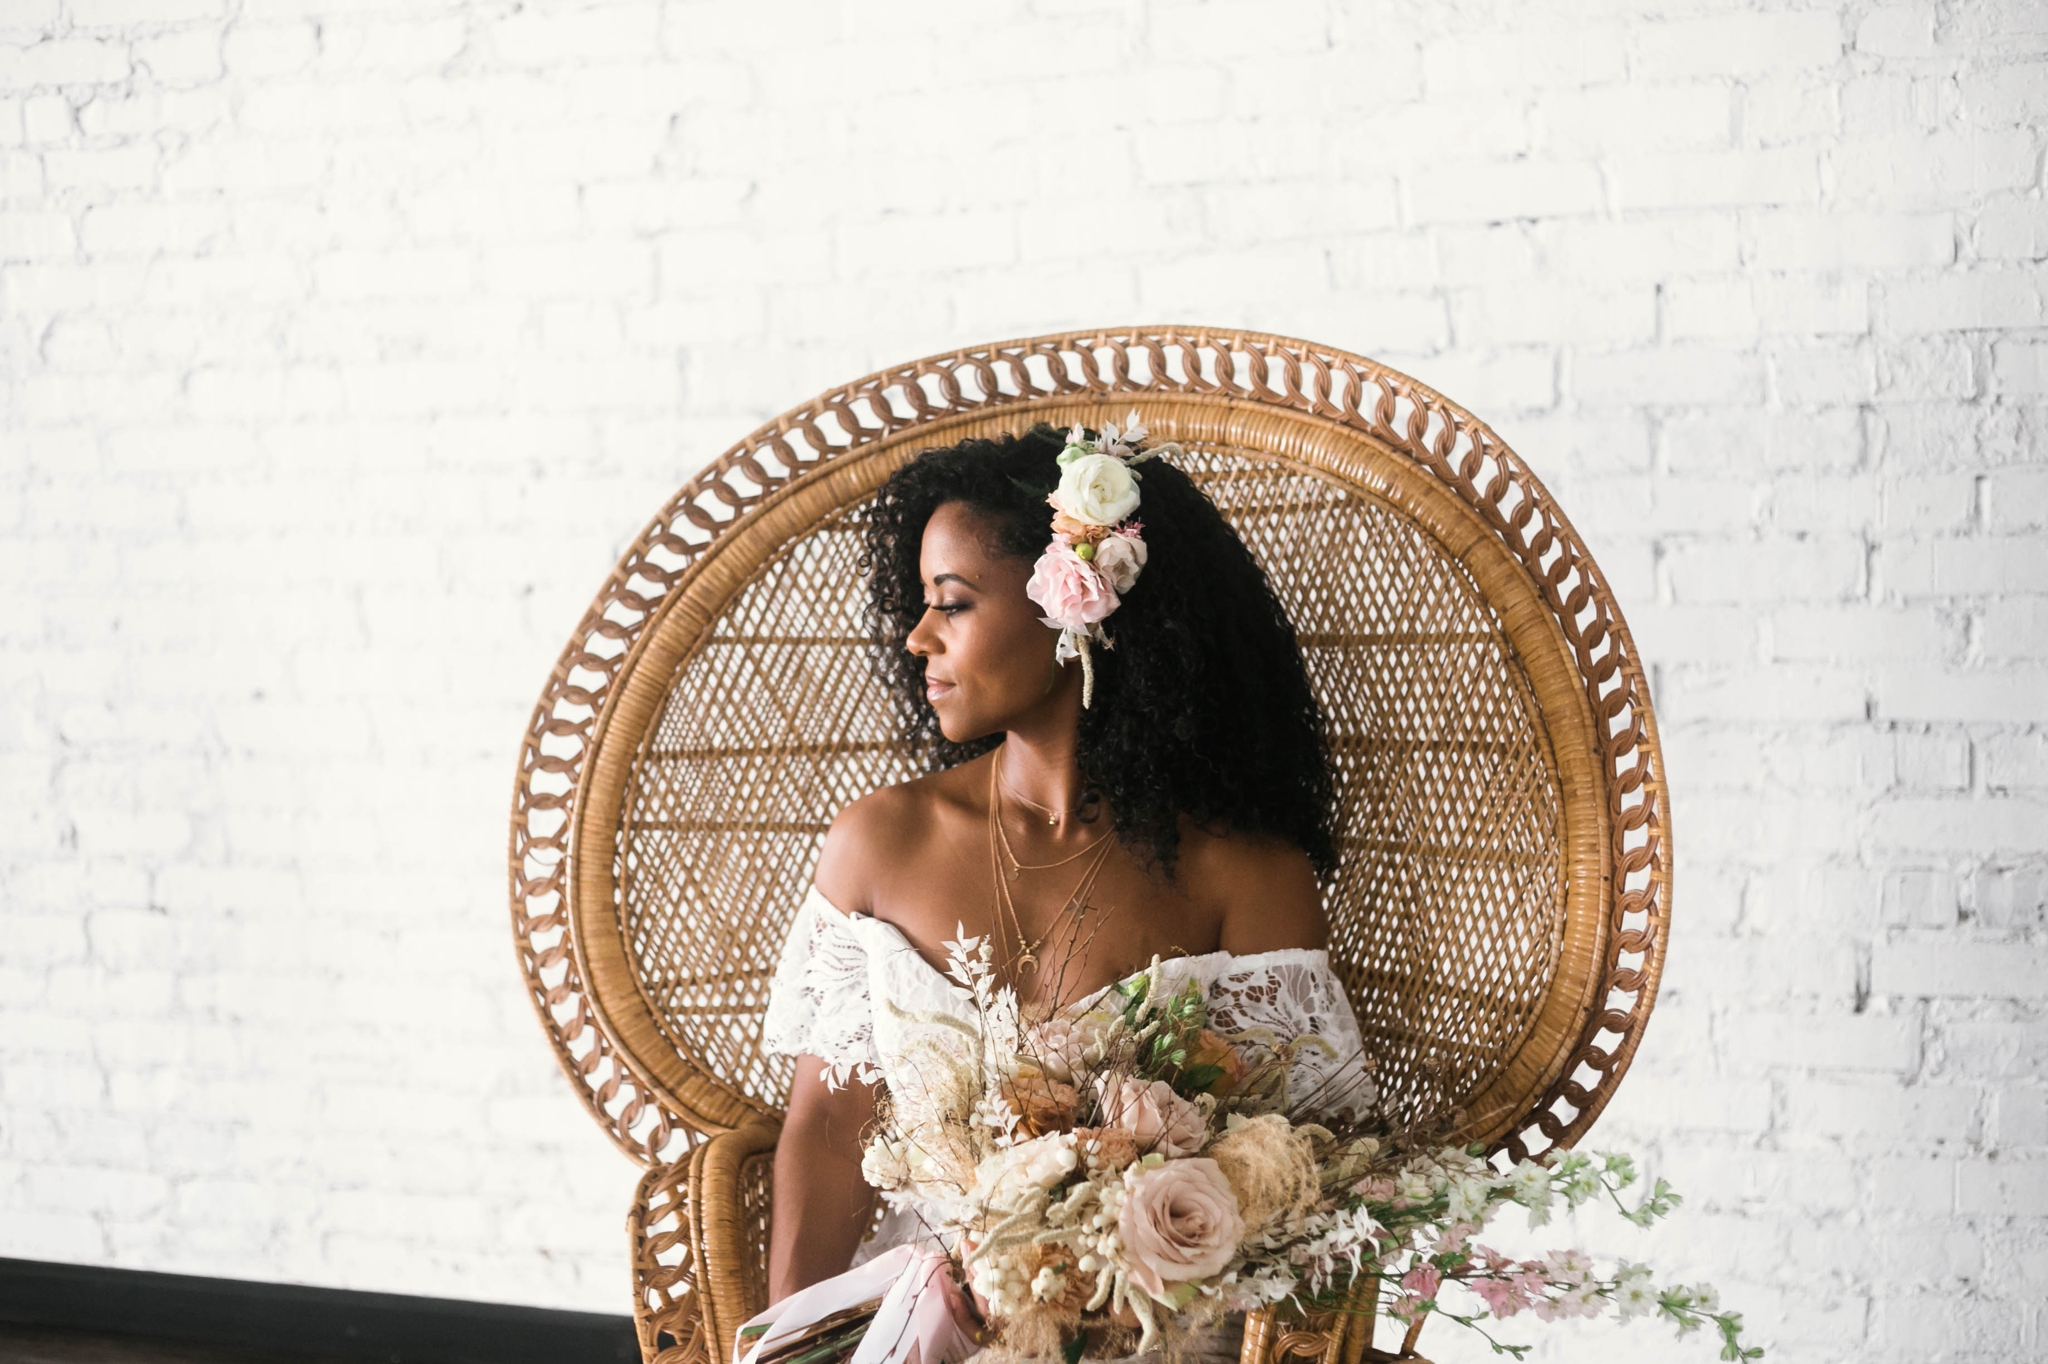  Indoor Wedding Portraits, shot with natural light - black love - african american bride sitting in a Midcentury Woven Wicker Peacock Chair in a boho wedding dress with a big bouquet - tropical inspiration - honolulu, oahu, hawaii photographer 